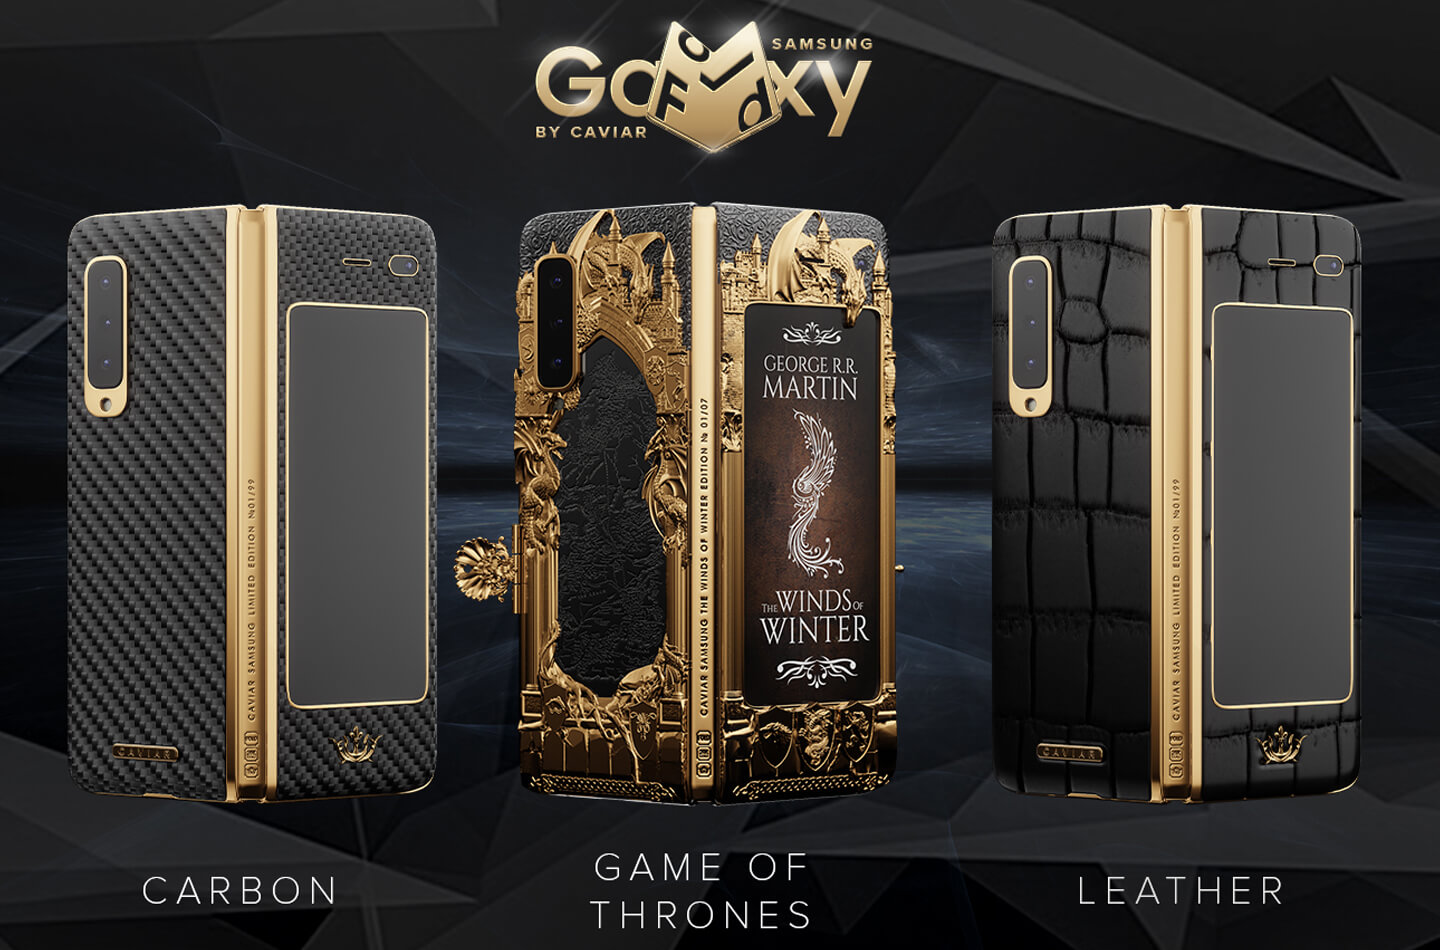 Samsung Galaxy Fold Game of Thrones Limited Edition